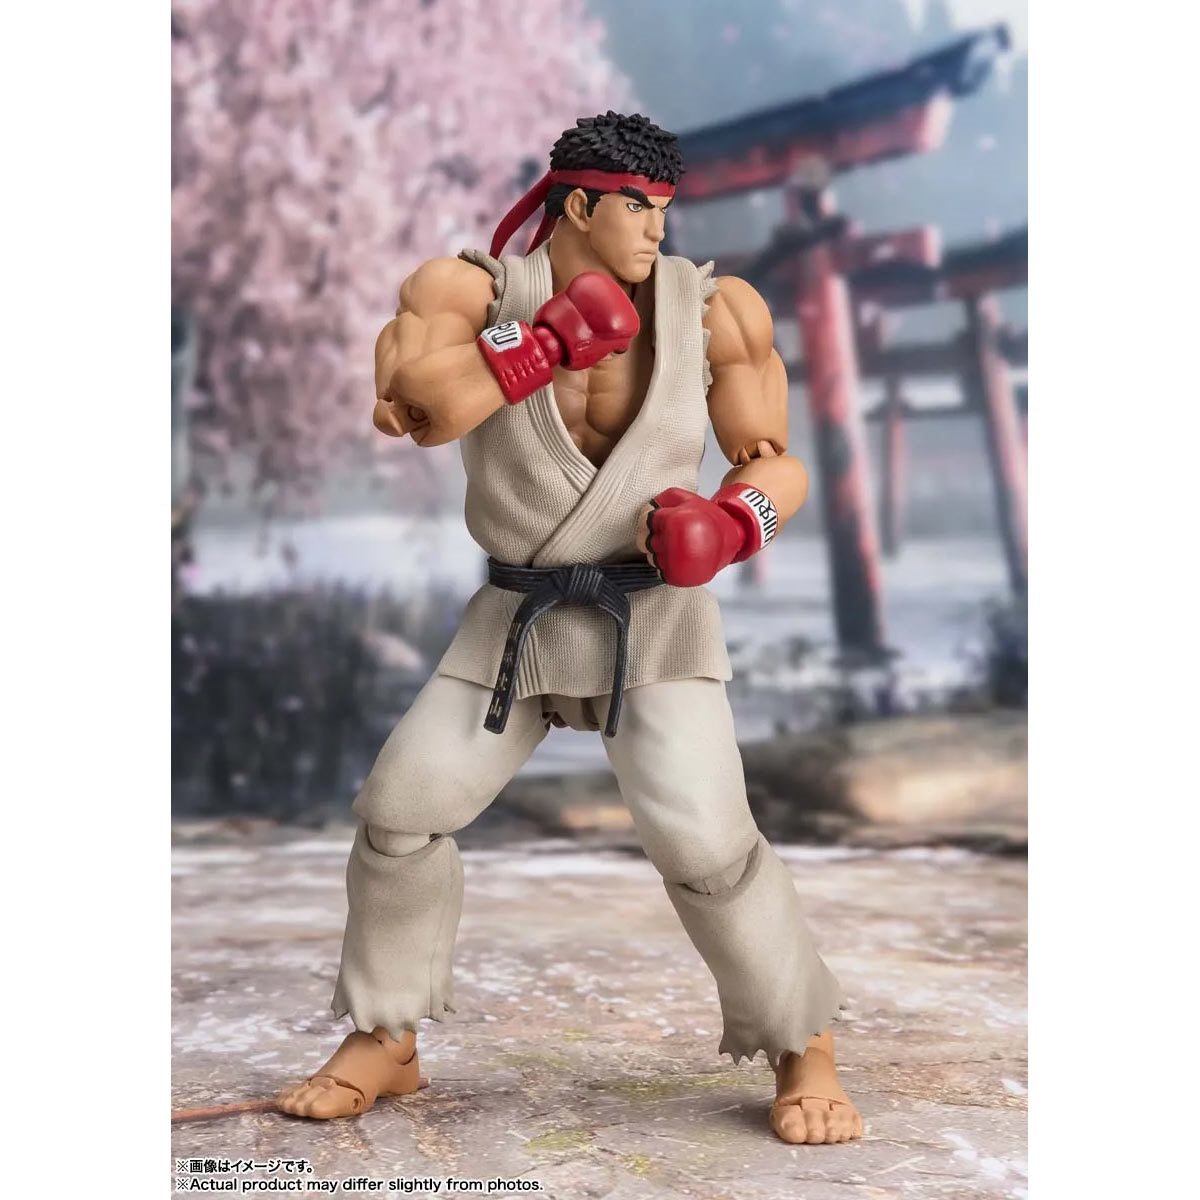 S.H.Figuarts Ryu Outfit 2 Street Fighter Action Figure